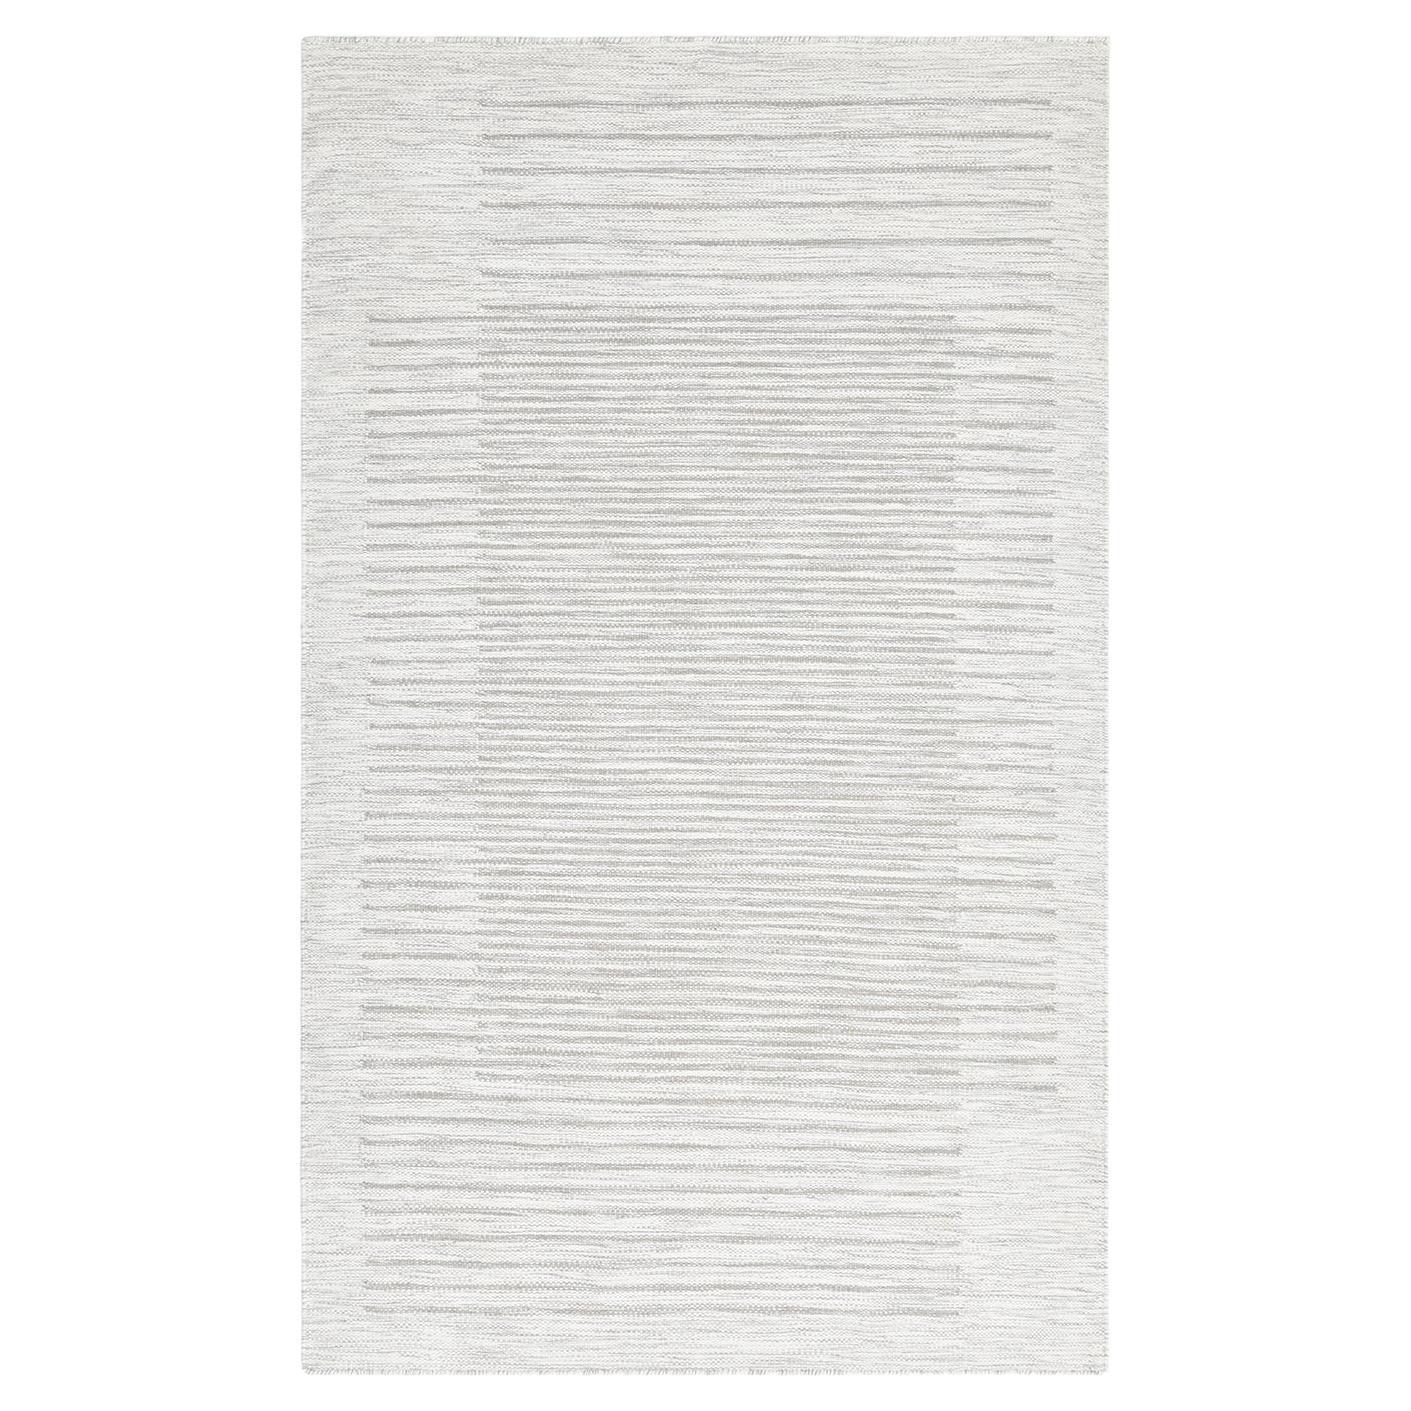 Solo Rugs Flatweave Striped Hand Woven Light Gray Area Rug